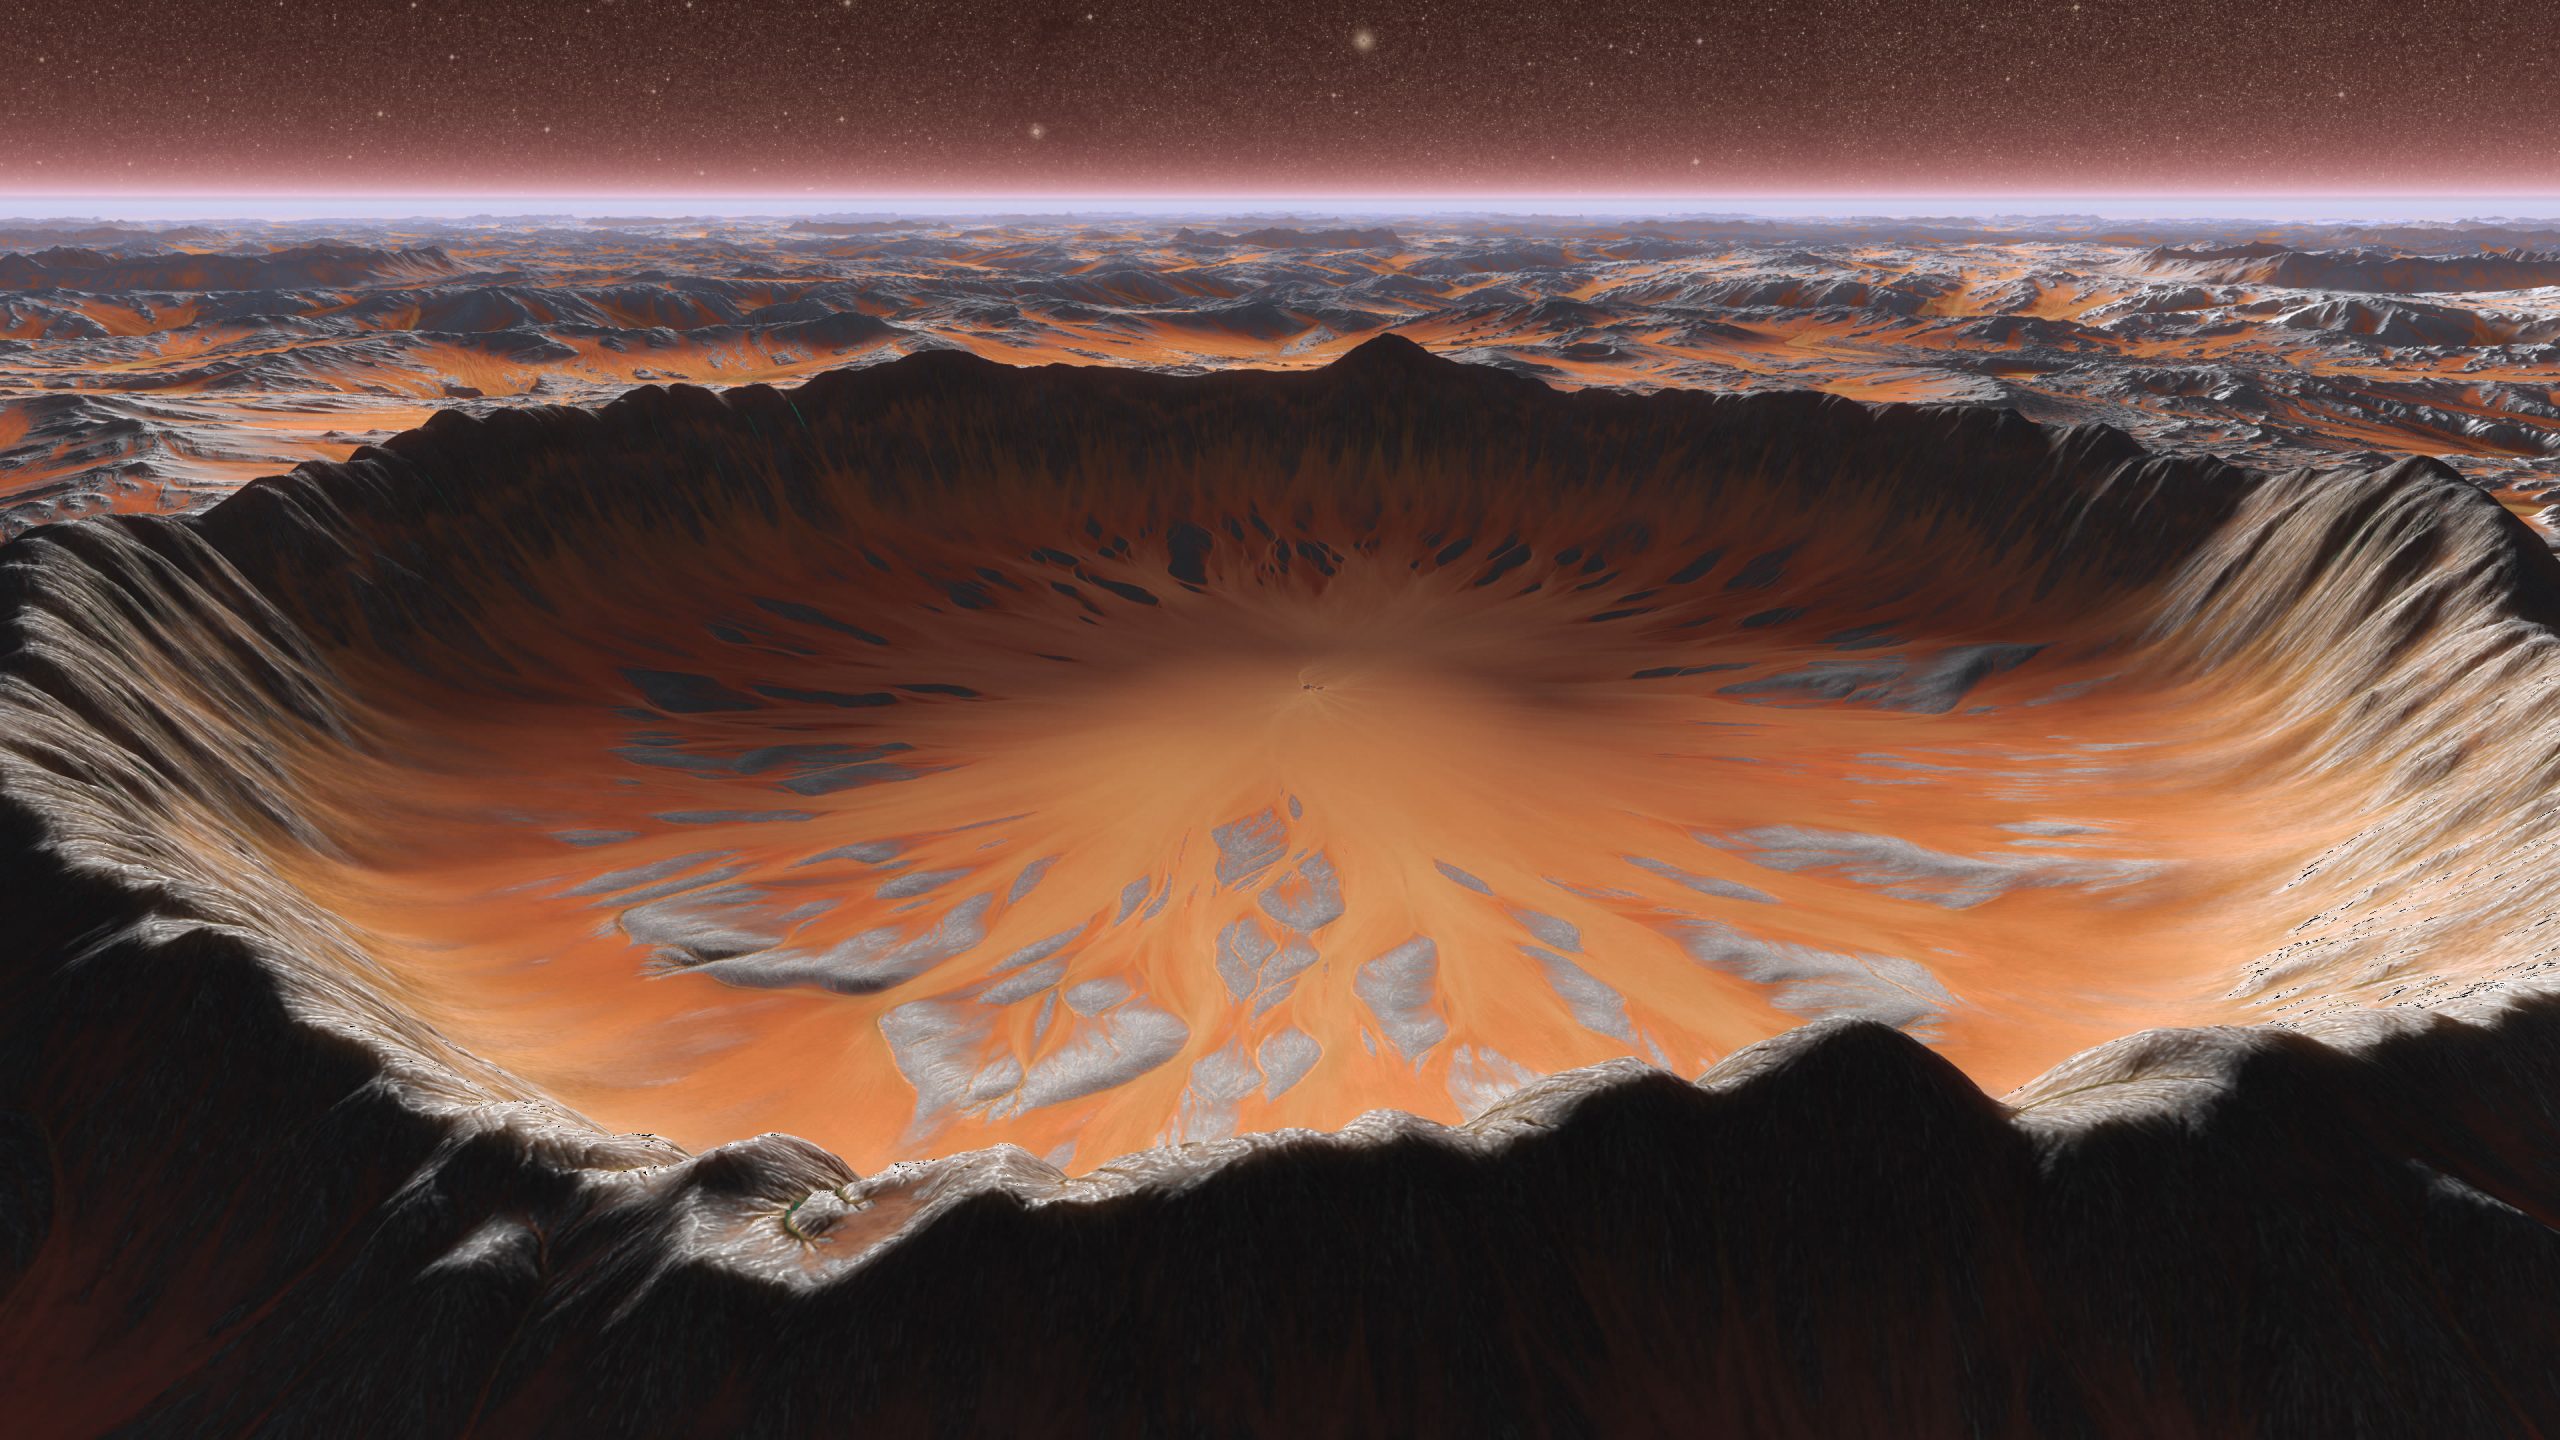 An artistic rendering of a crater on Mars. Depositphotos.